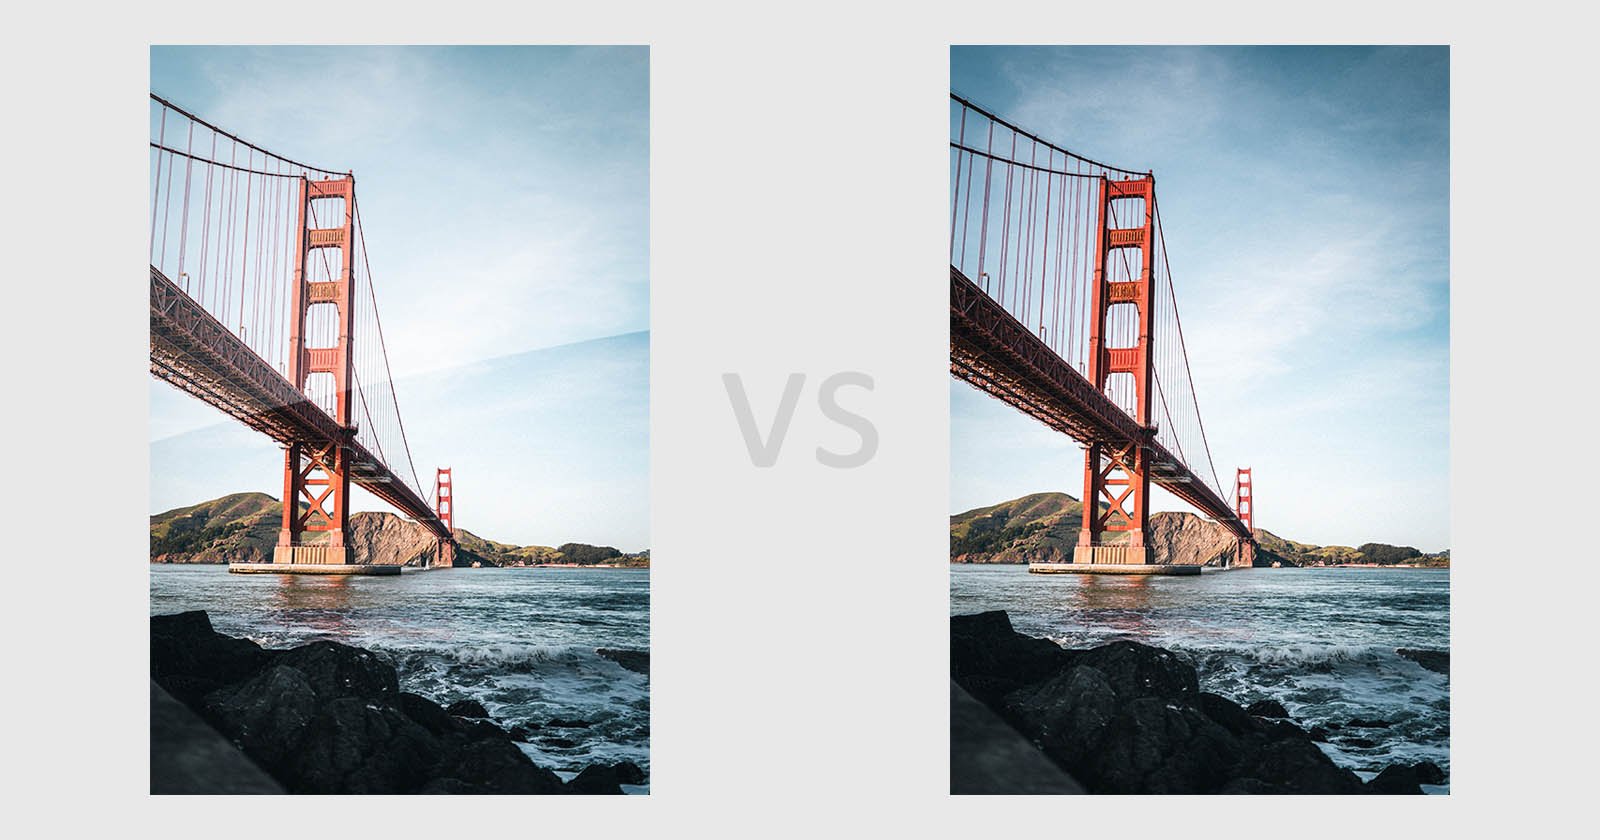 Glossy vs Matte vs Pearl: Which Finish Is Best for My Photo Prints?